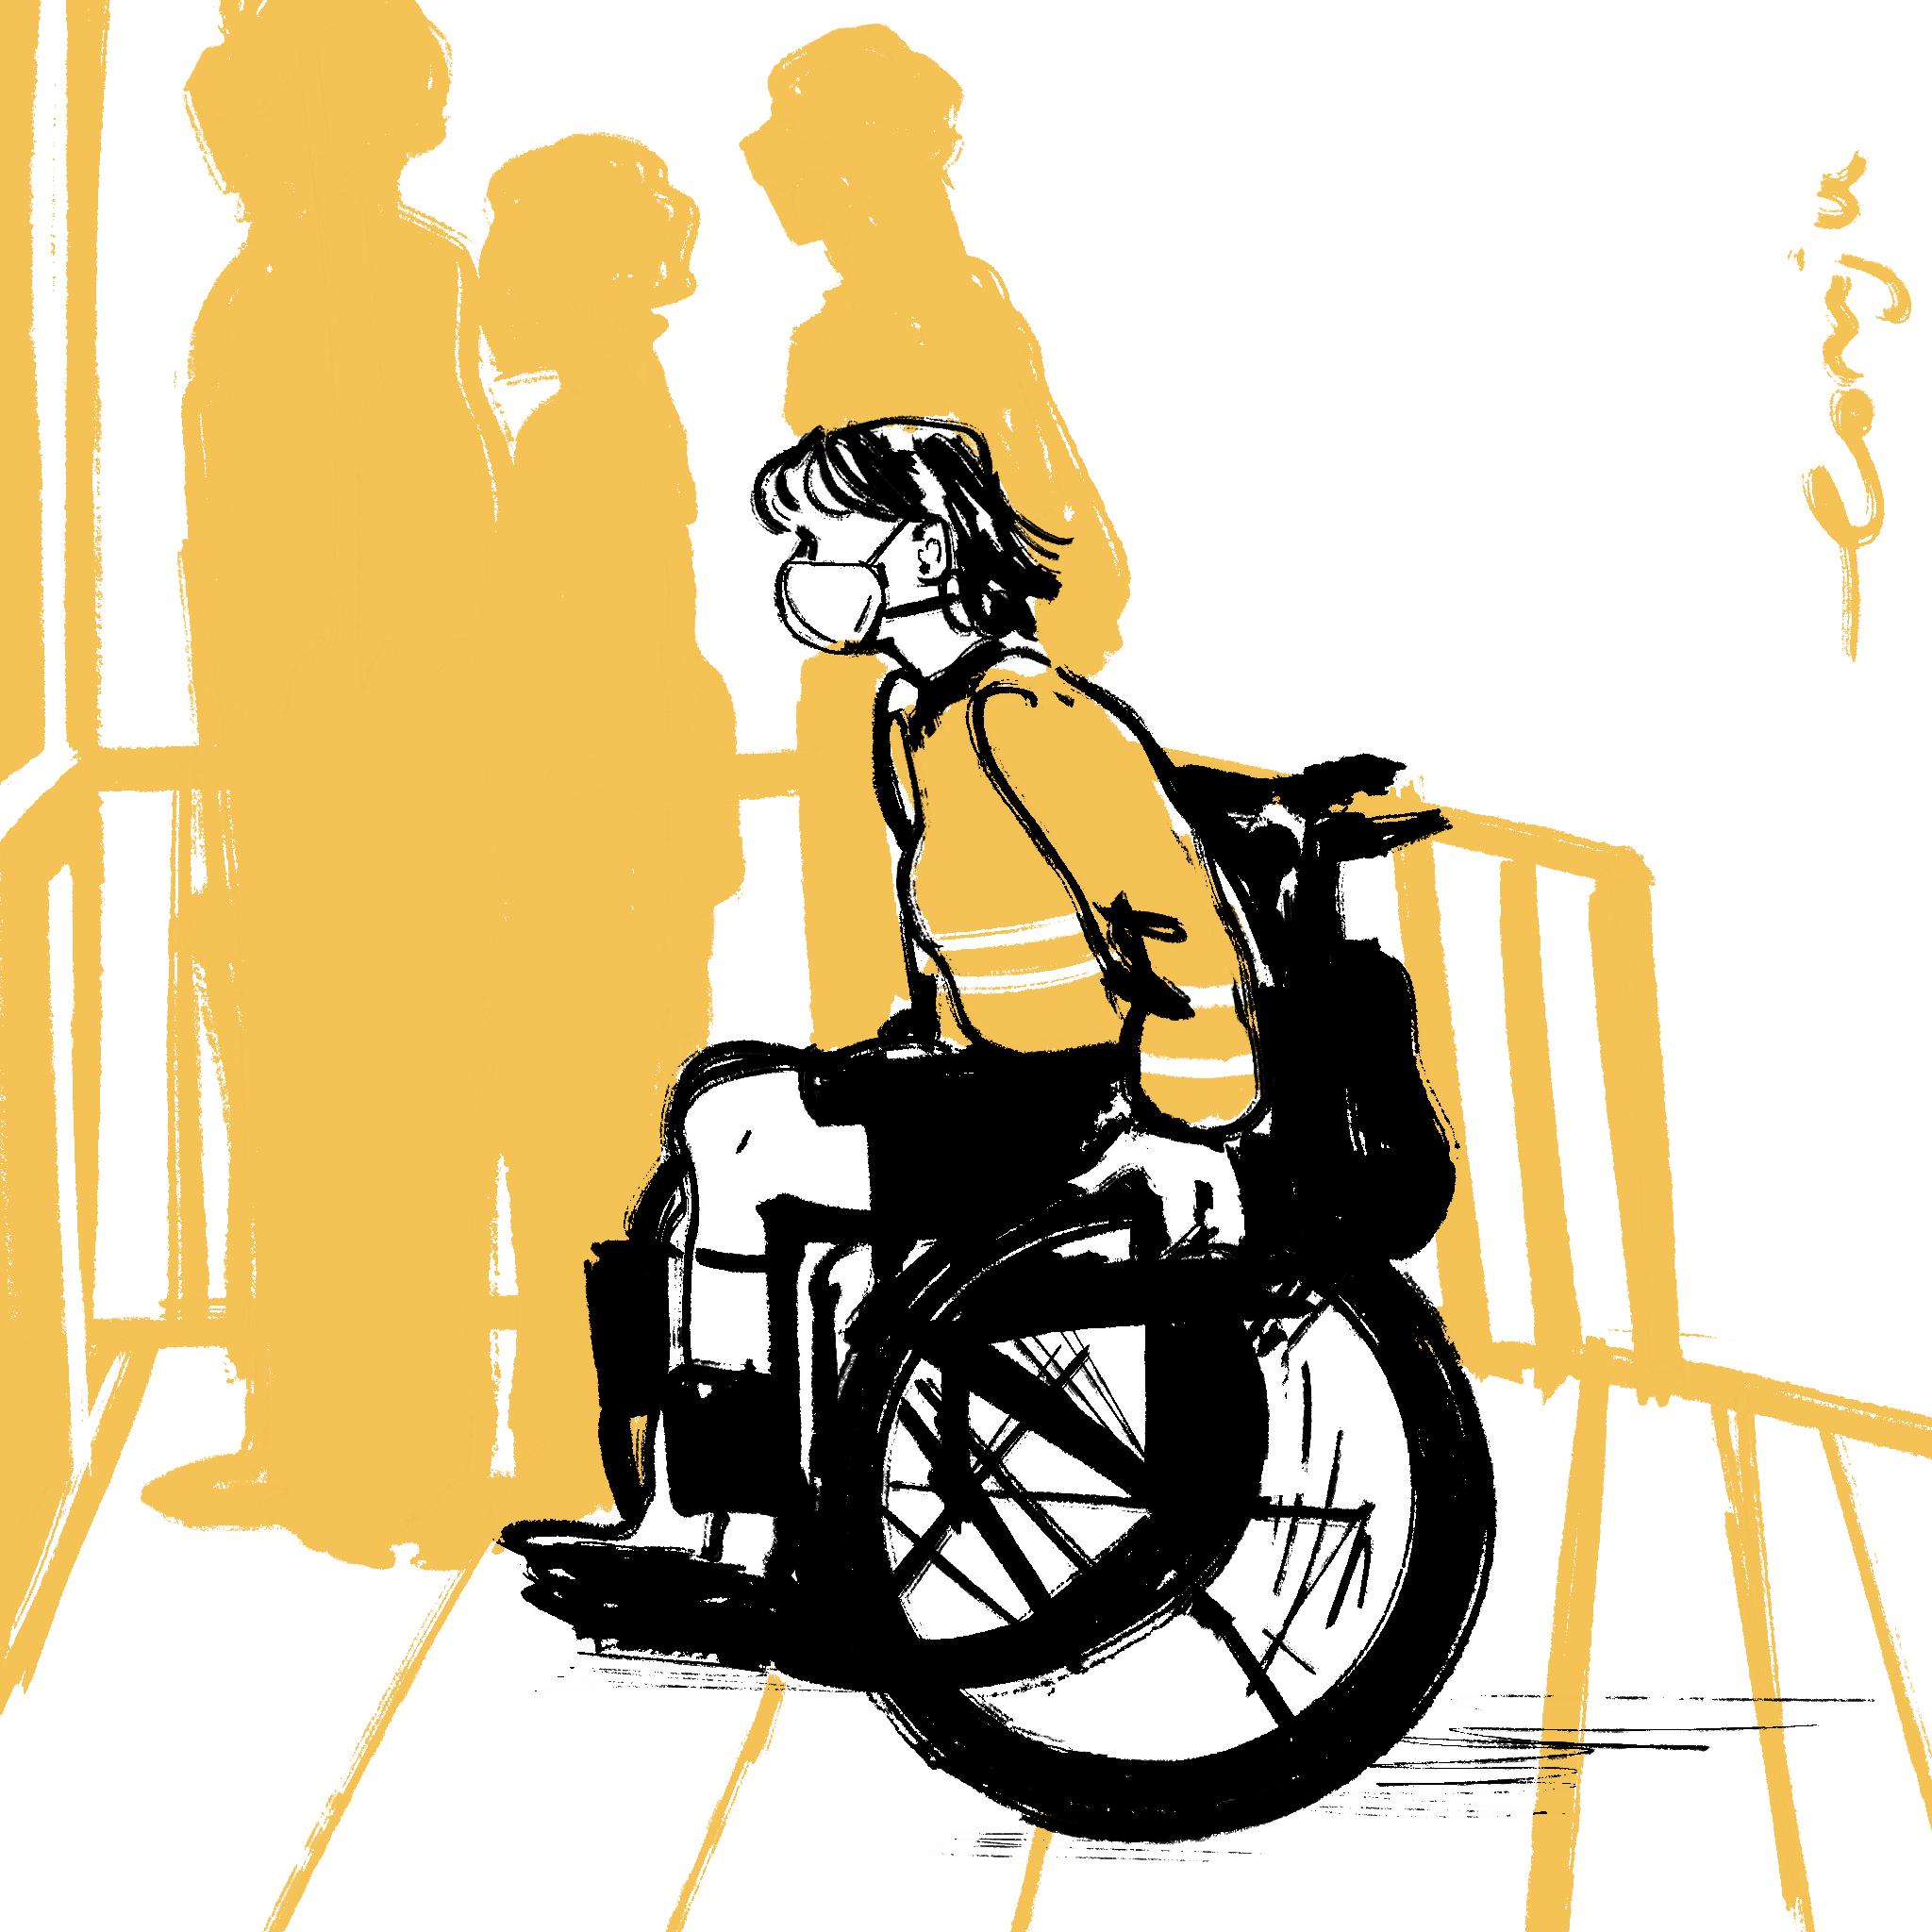 An illustration of a wheelchair user